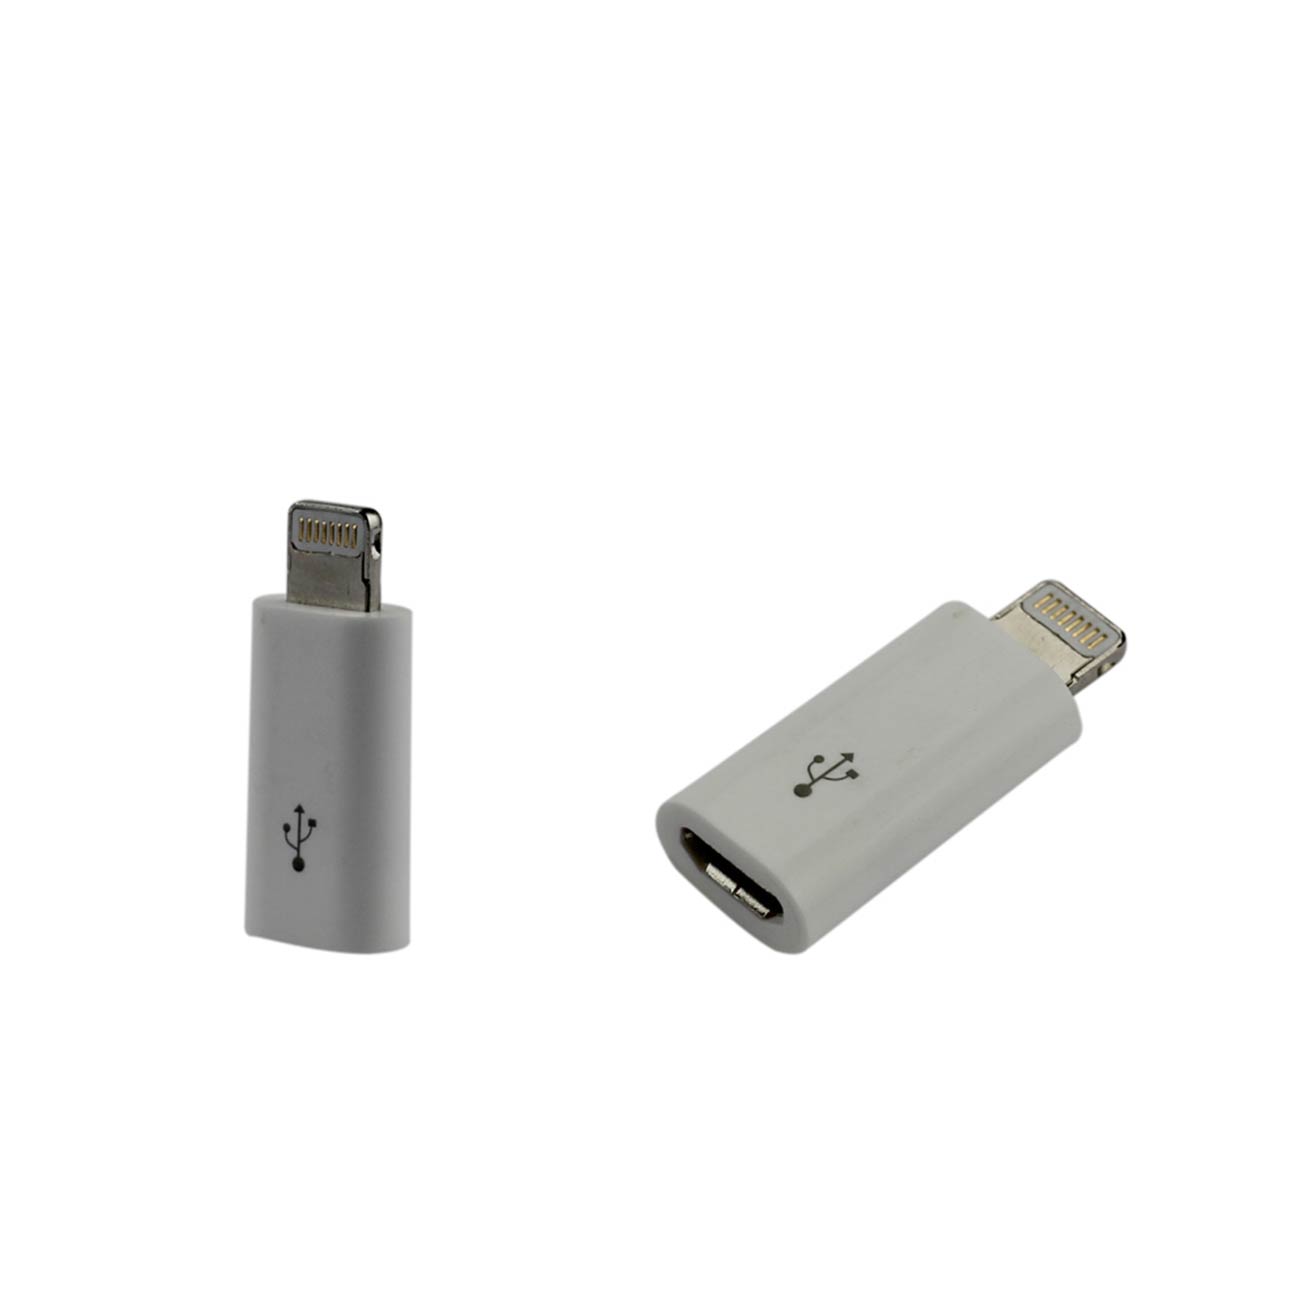 Adapter Stick AC To DC 650MAH White Color